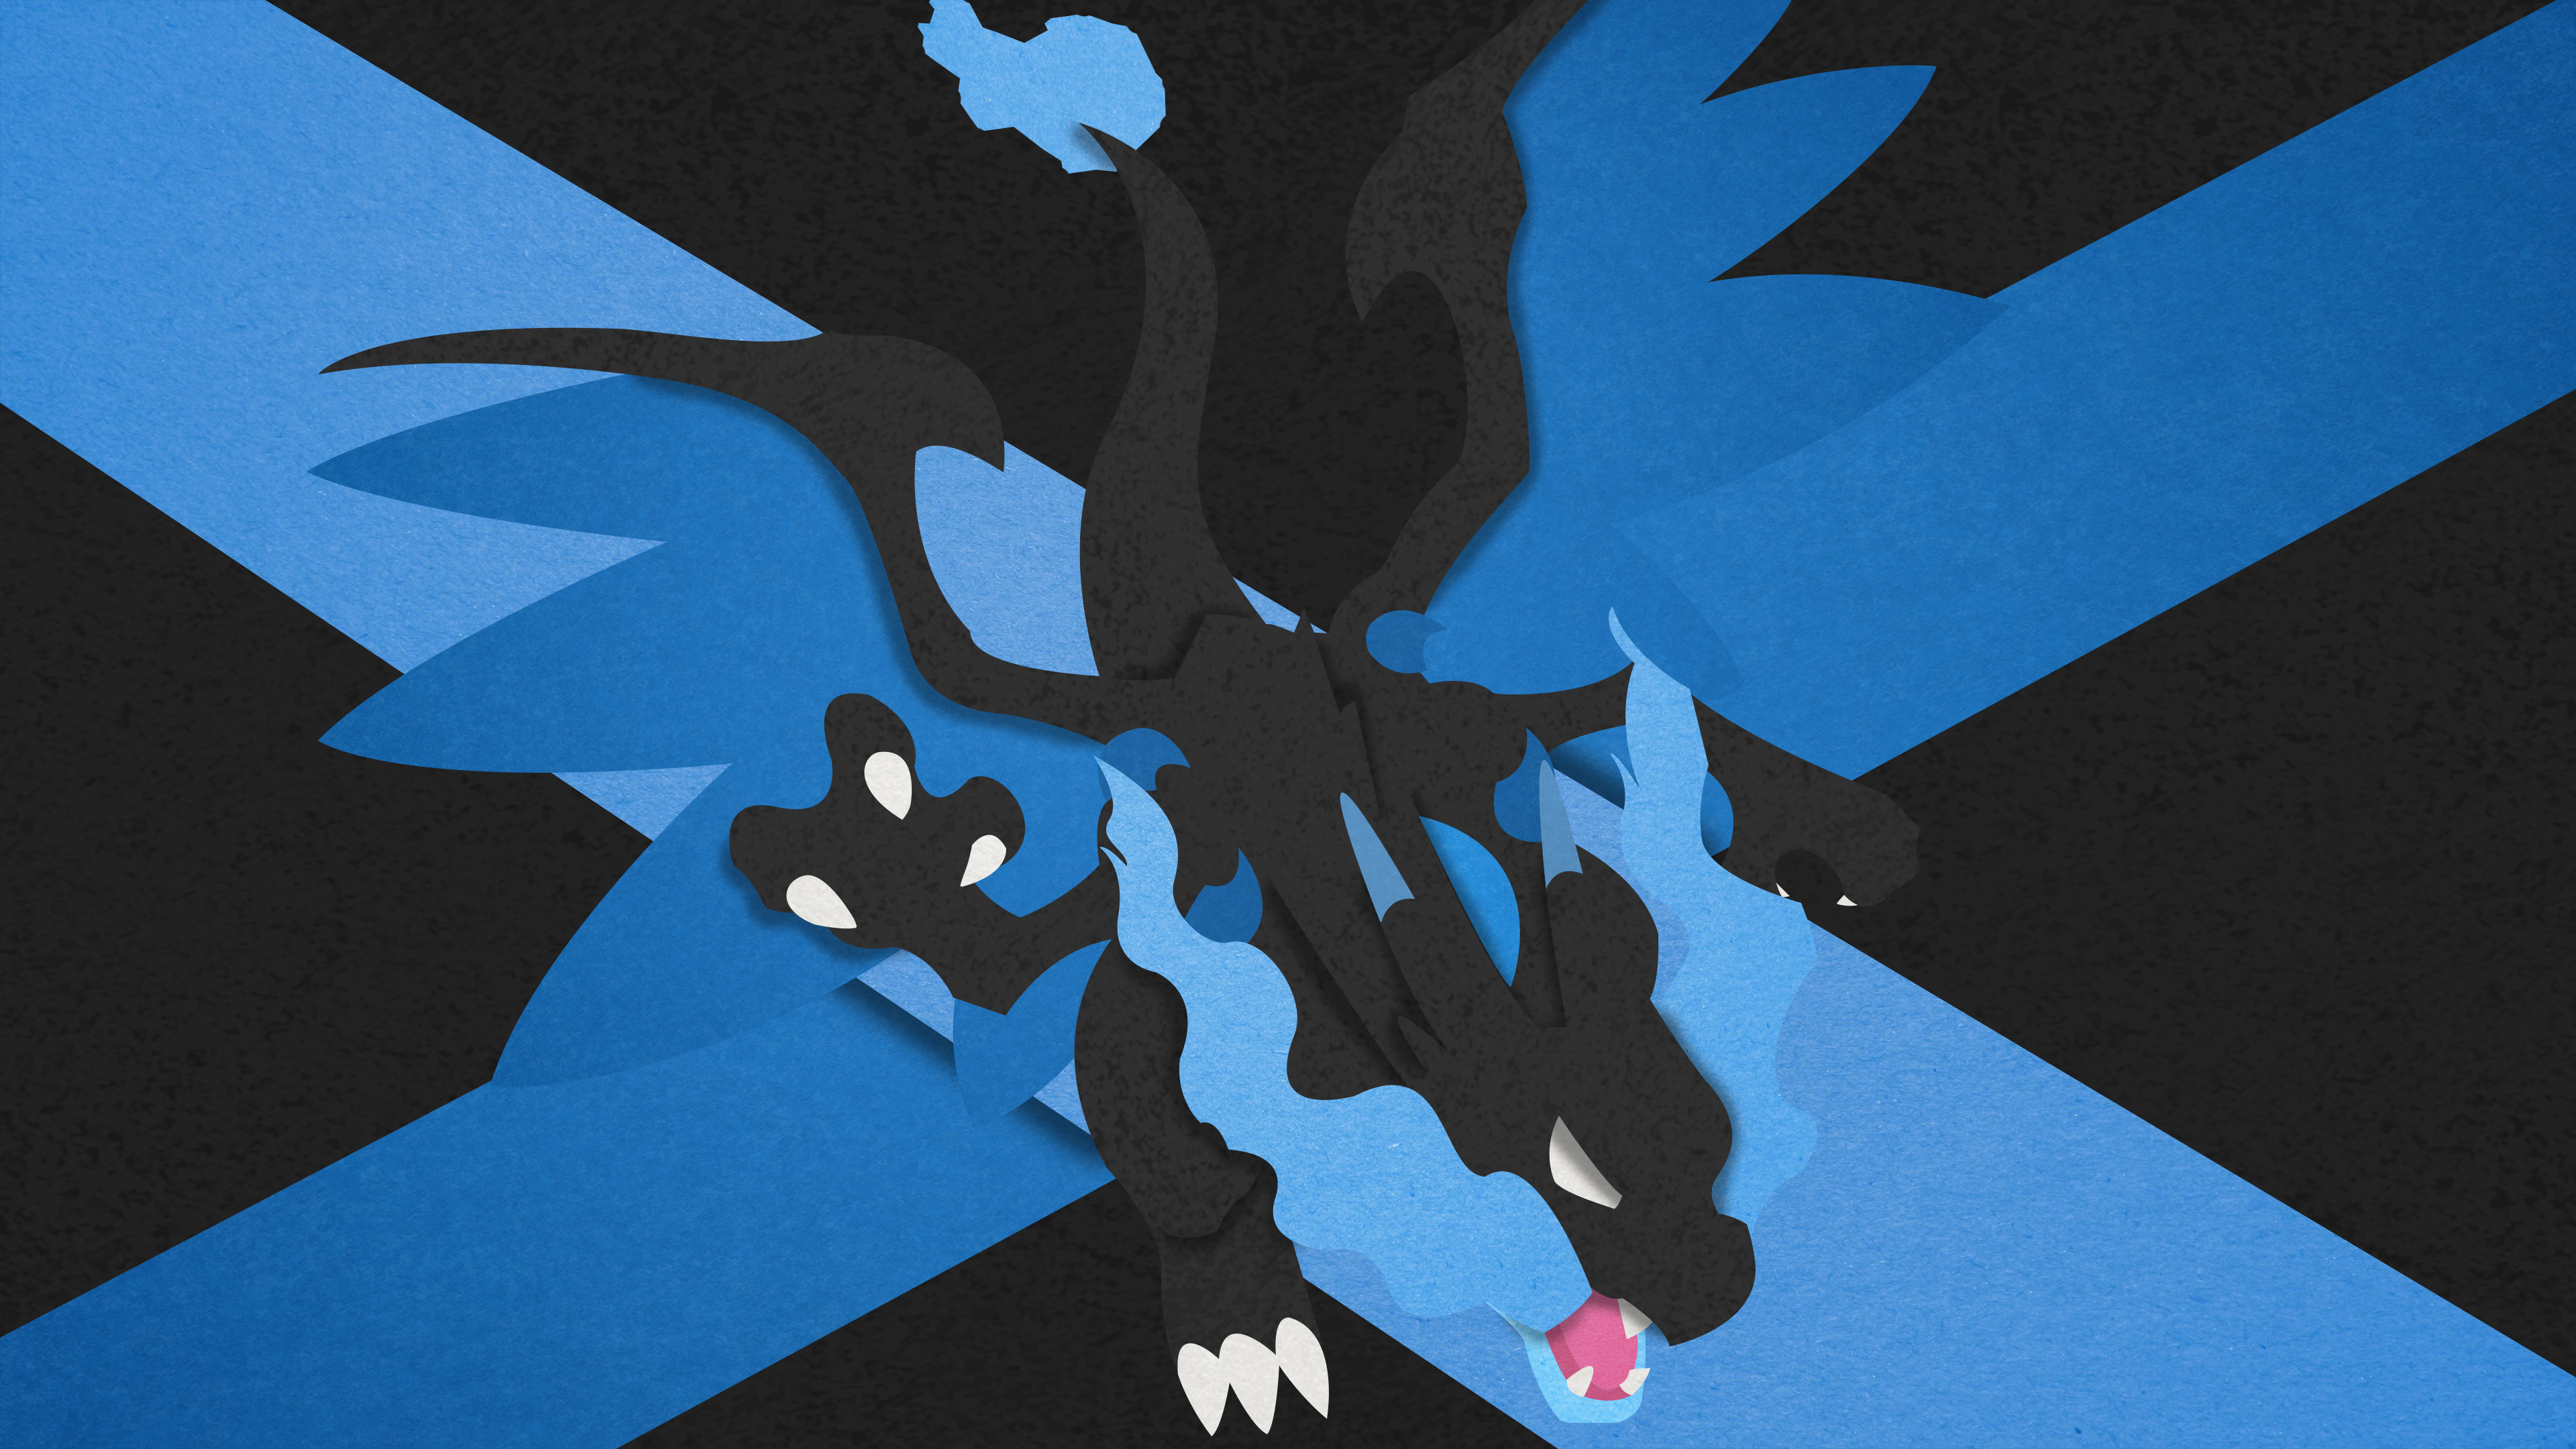 3840x2160 ... Mega Charizard X - Material Design by EugenianToons